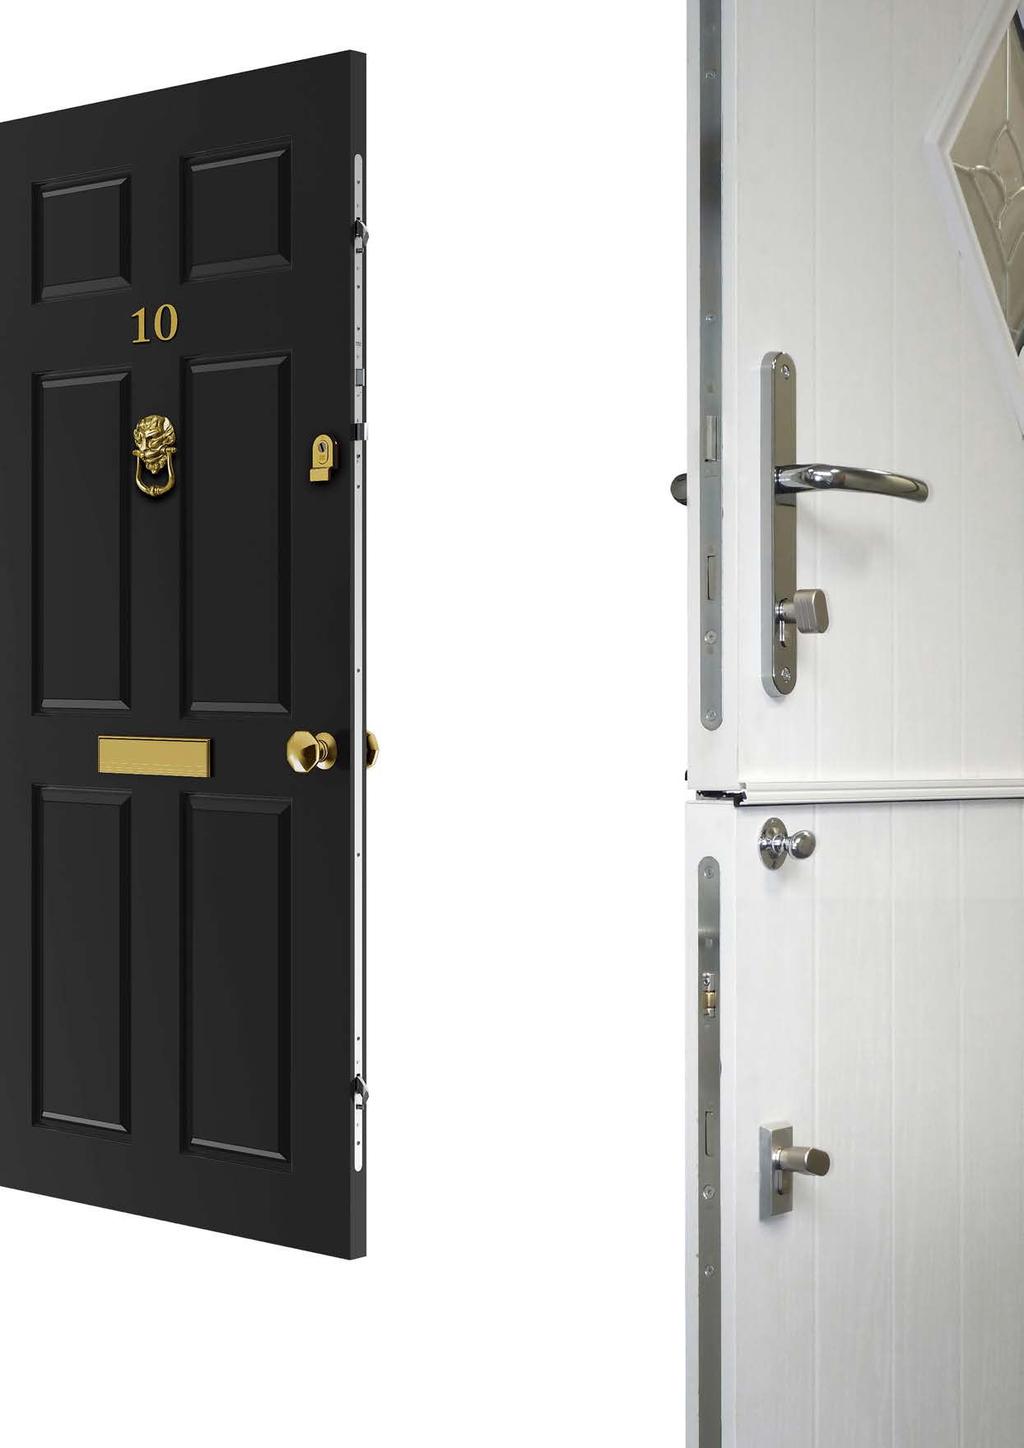 The Reliance family of locks has been carefully selected to give you maximum security and peace of mind before and after the product has been fitted.